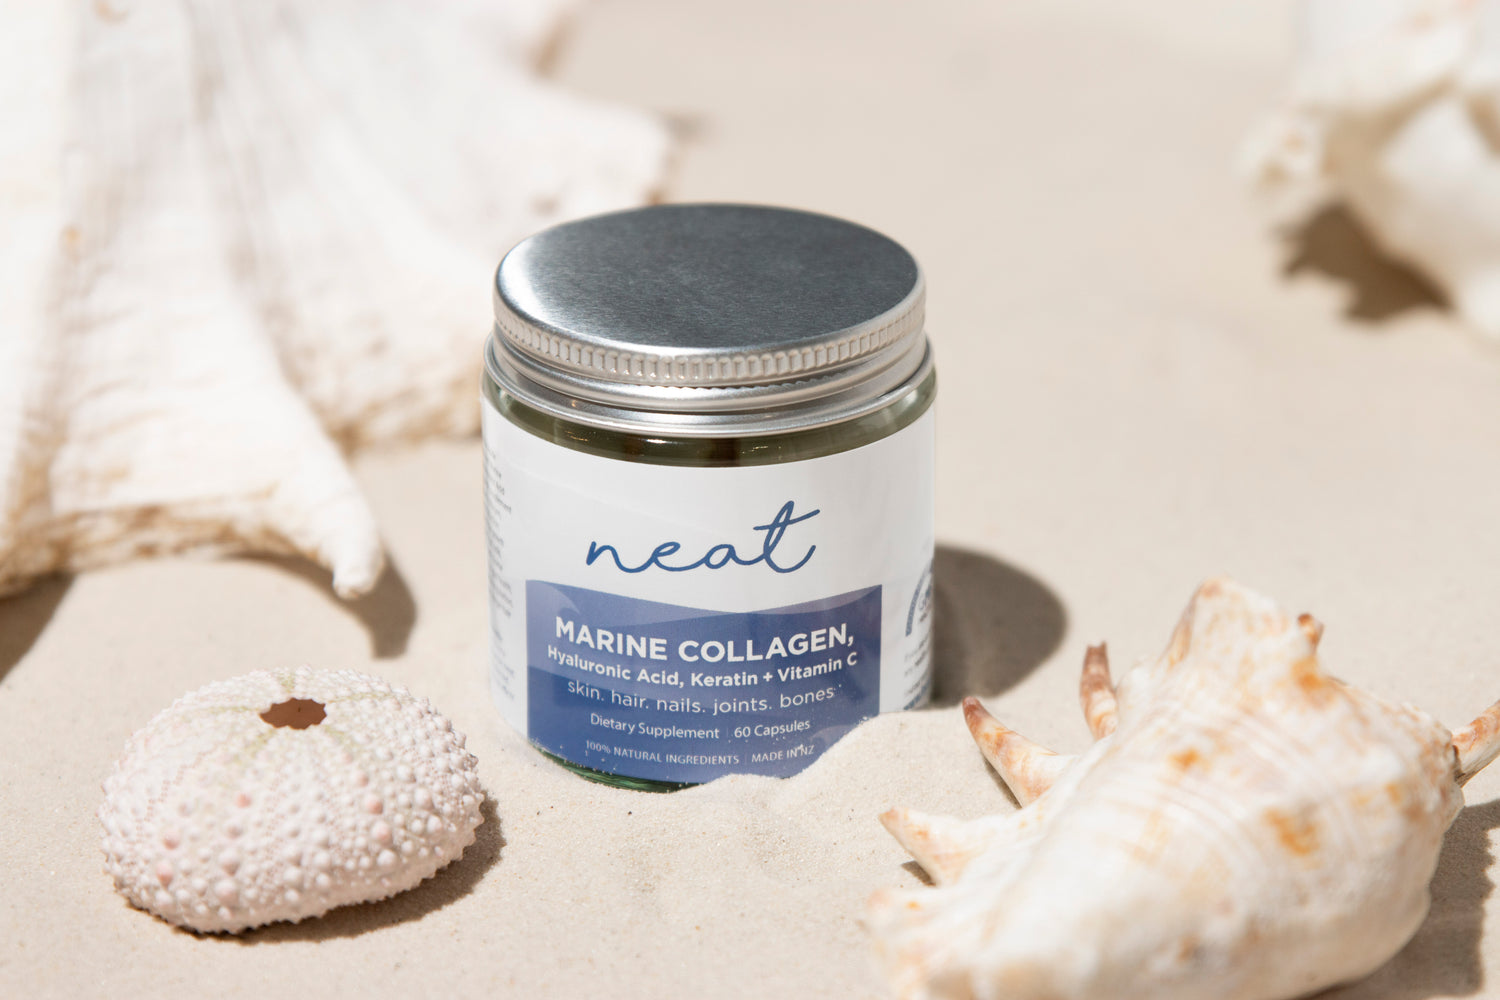 Marine Collagen, Hyaluronic Acid, Keratin and Vitamin C Supplement - 100% Natural